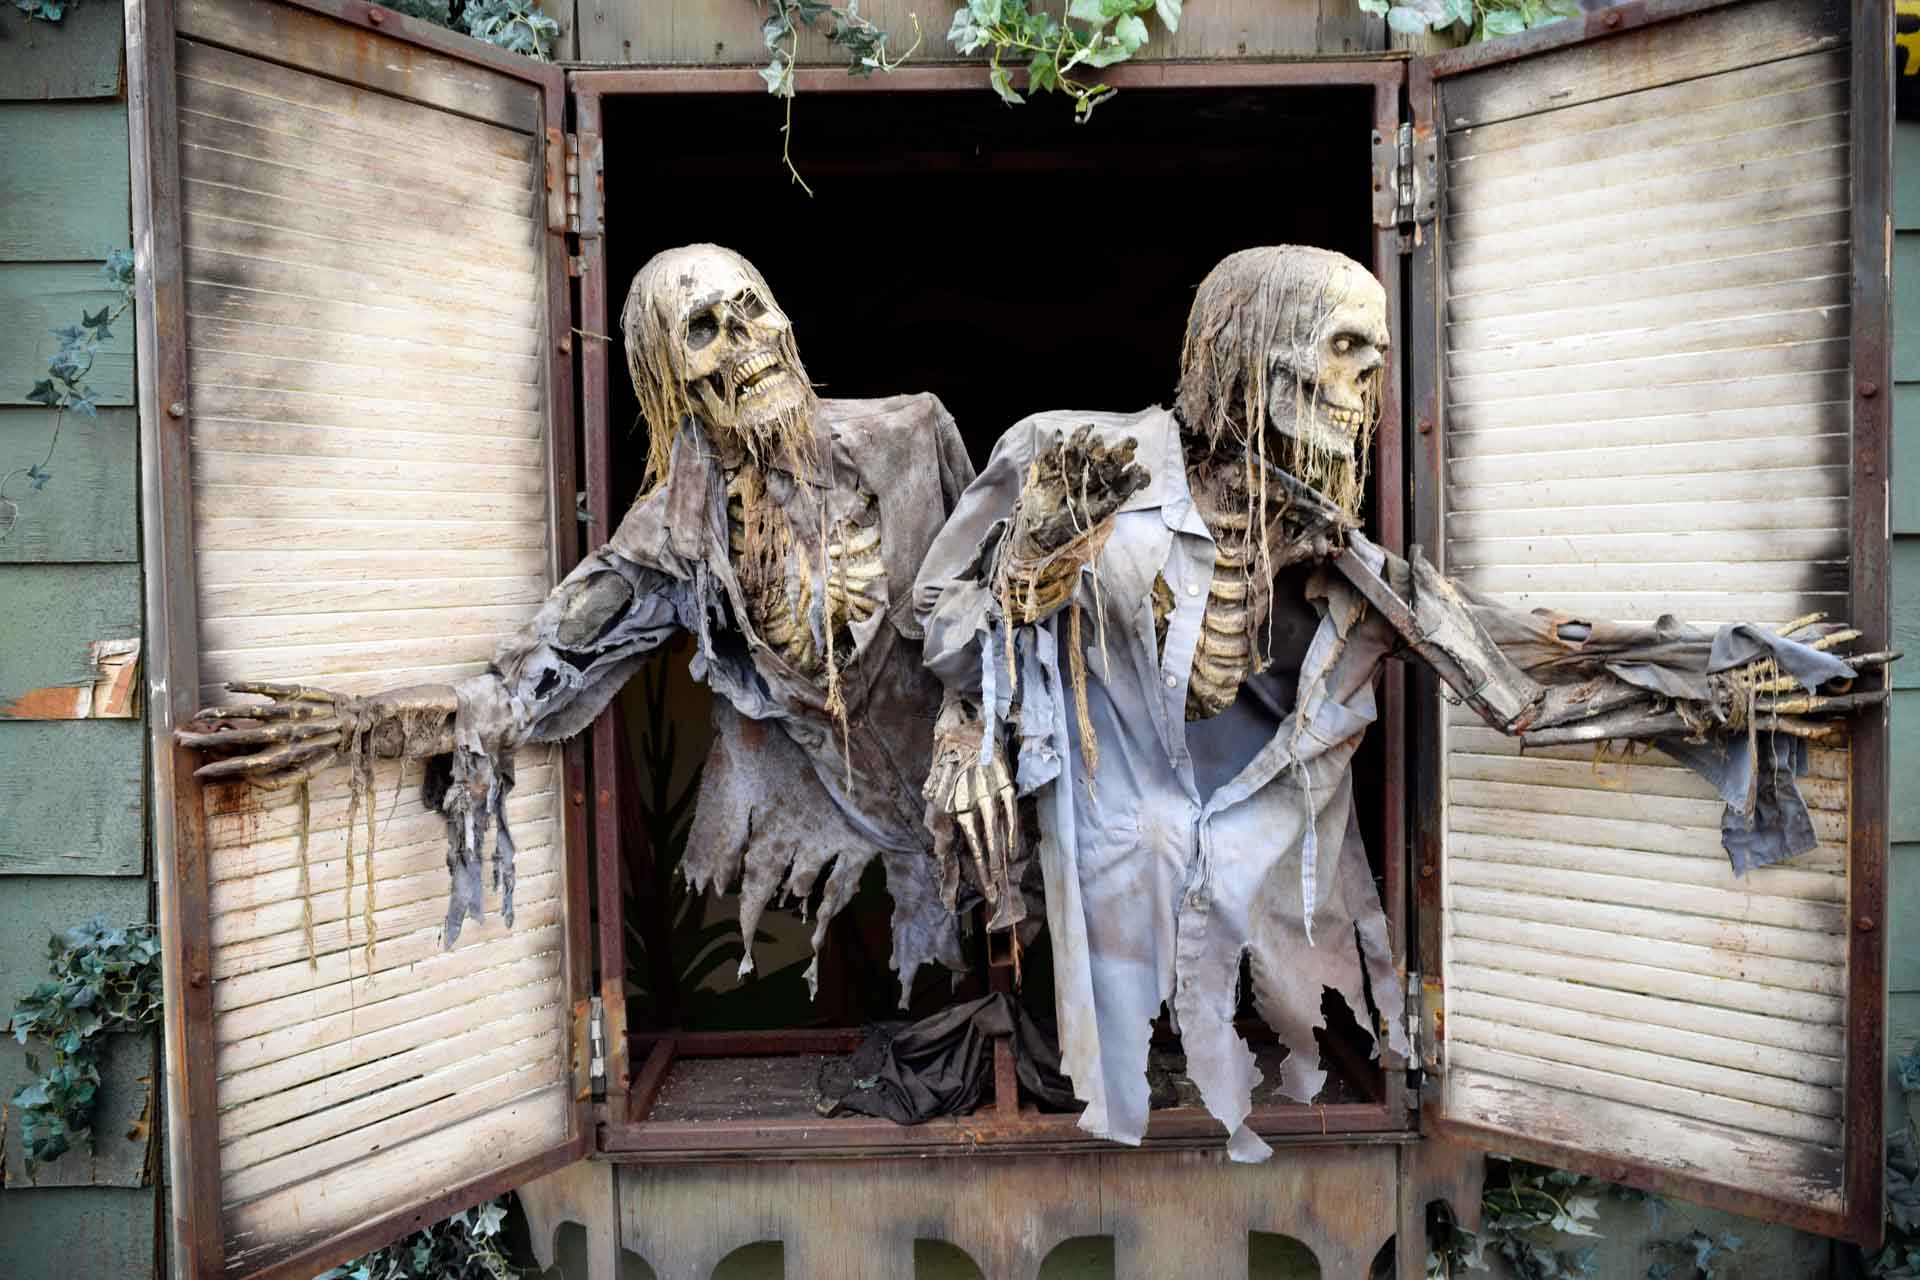 Skeletons popping out of a window in a haunted house.